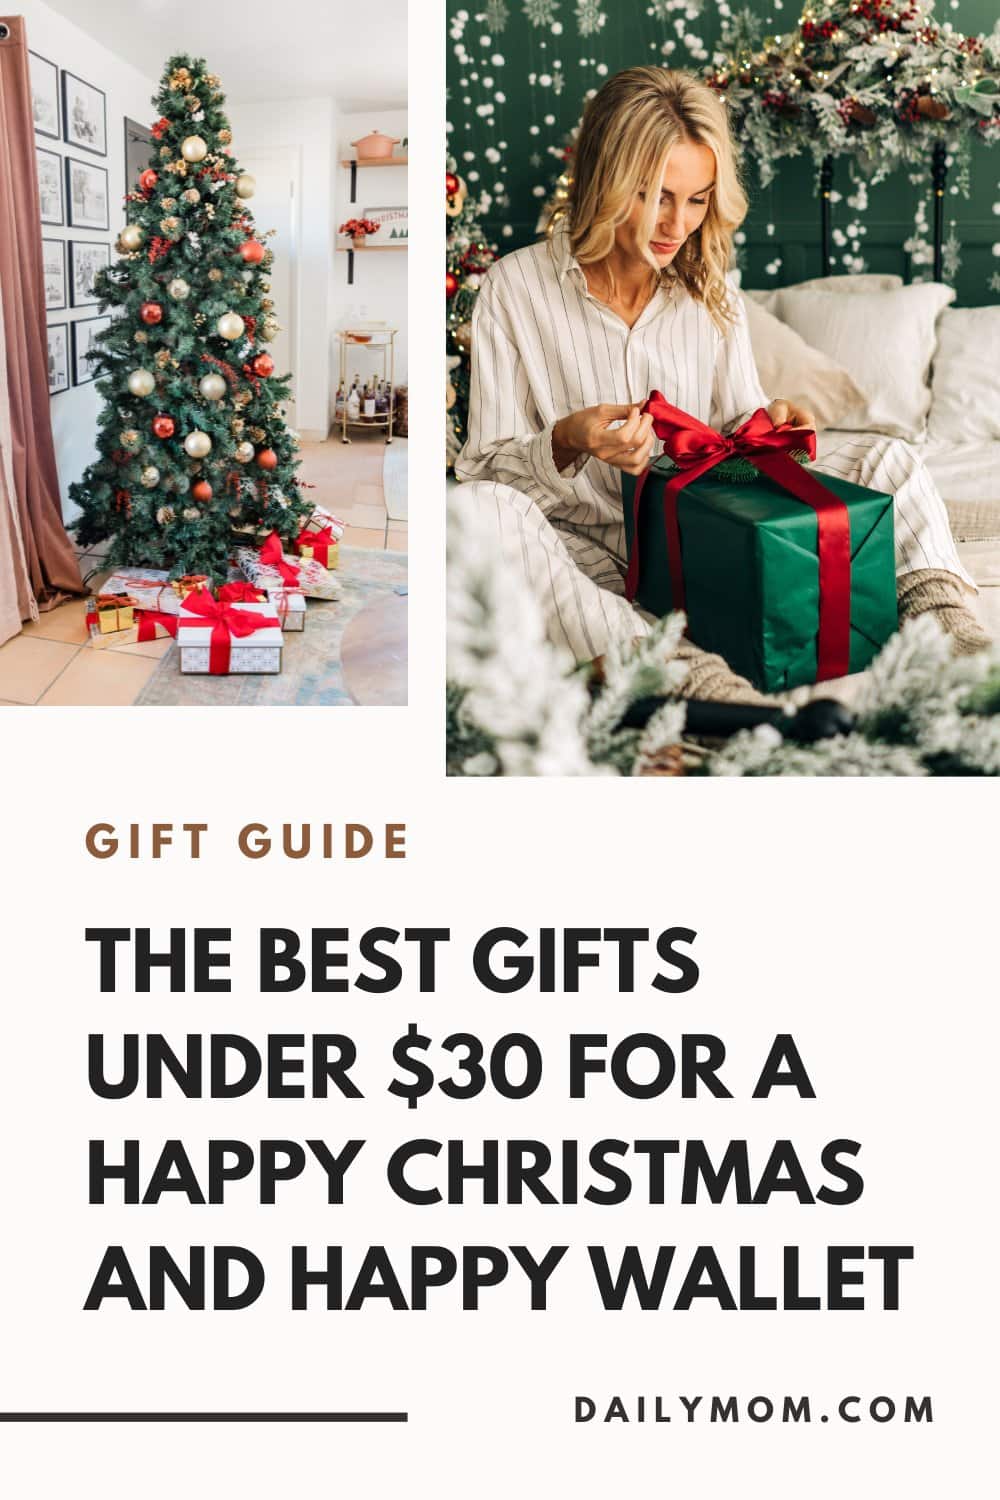 25 Of The Best Gifts Under $30 For A Happy Christmas And Happy